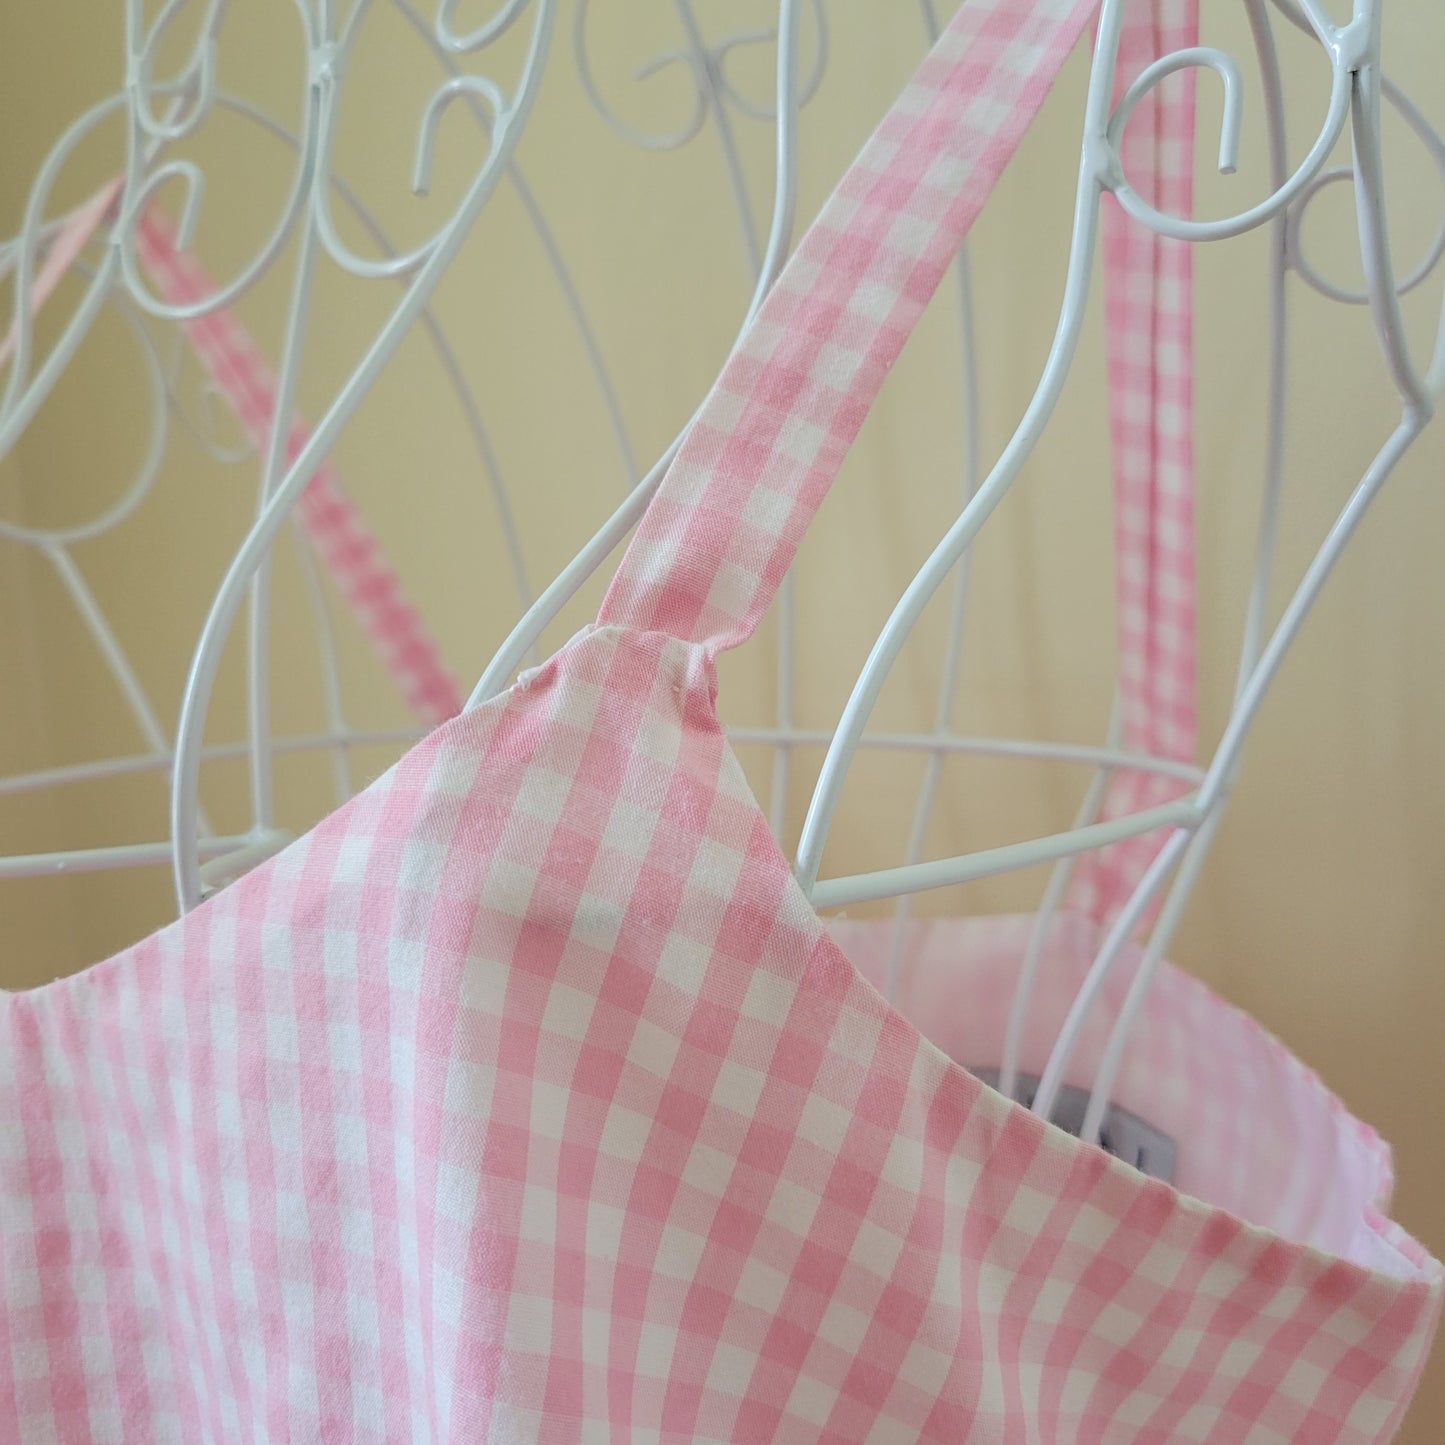 pink and white gingham spagetti strap midi dress